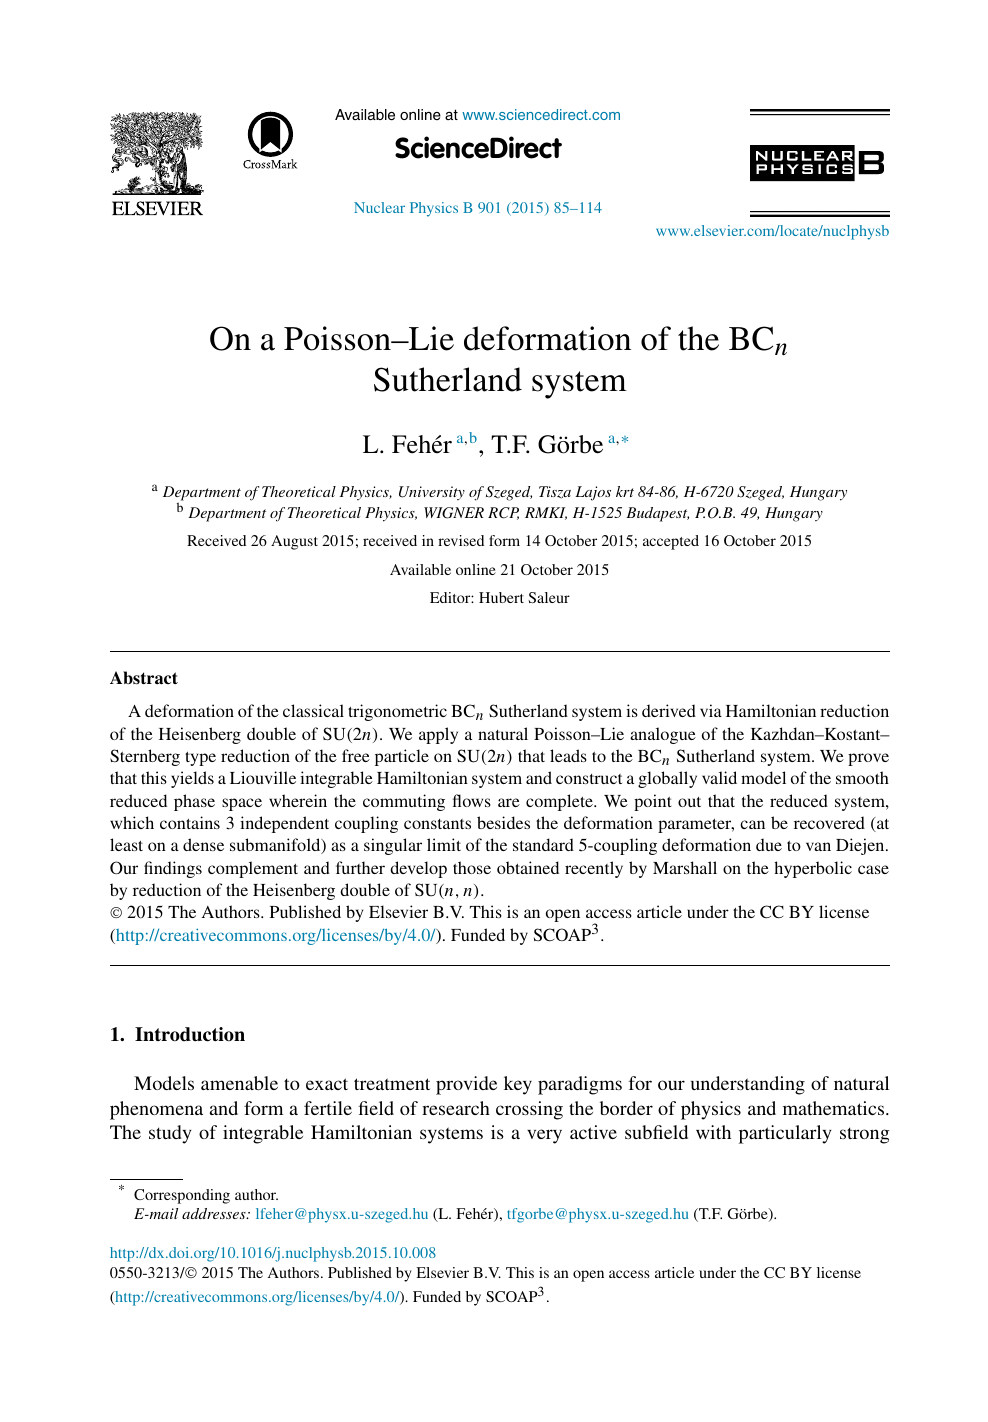 On A Poisson Lie Deformation Of The n Sutherland System Topic Of Research Paper In Physical Sciences Download Scholarly Article Pdf And Read For Free On Cyberleninka Open Science Hub